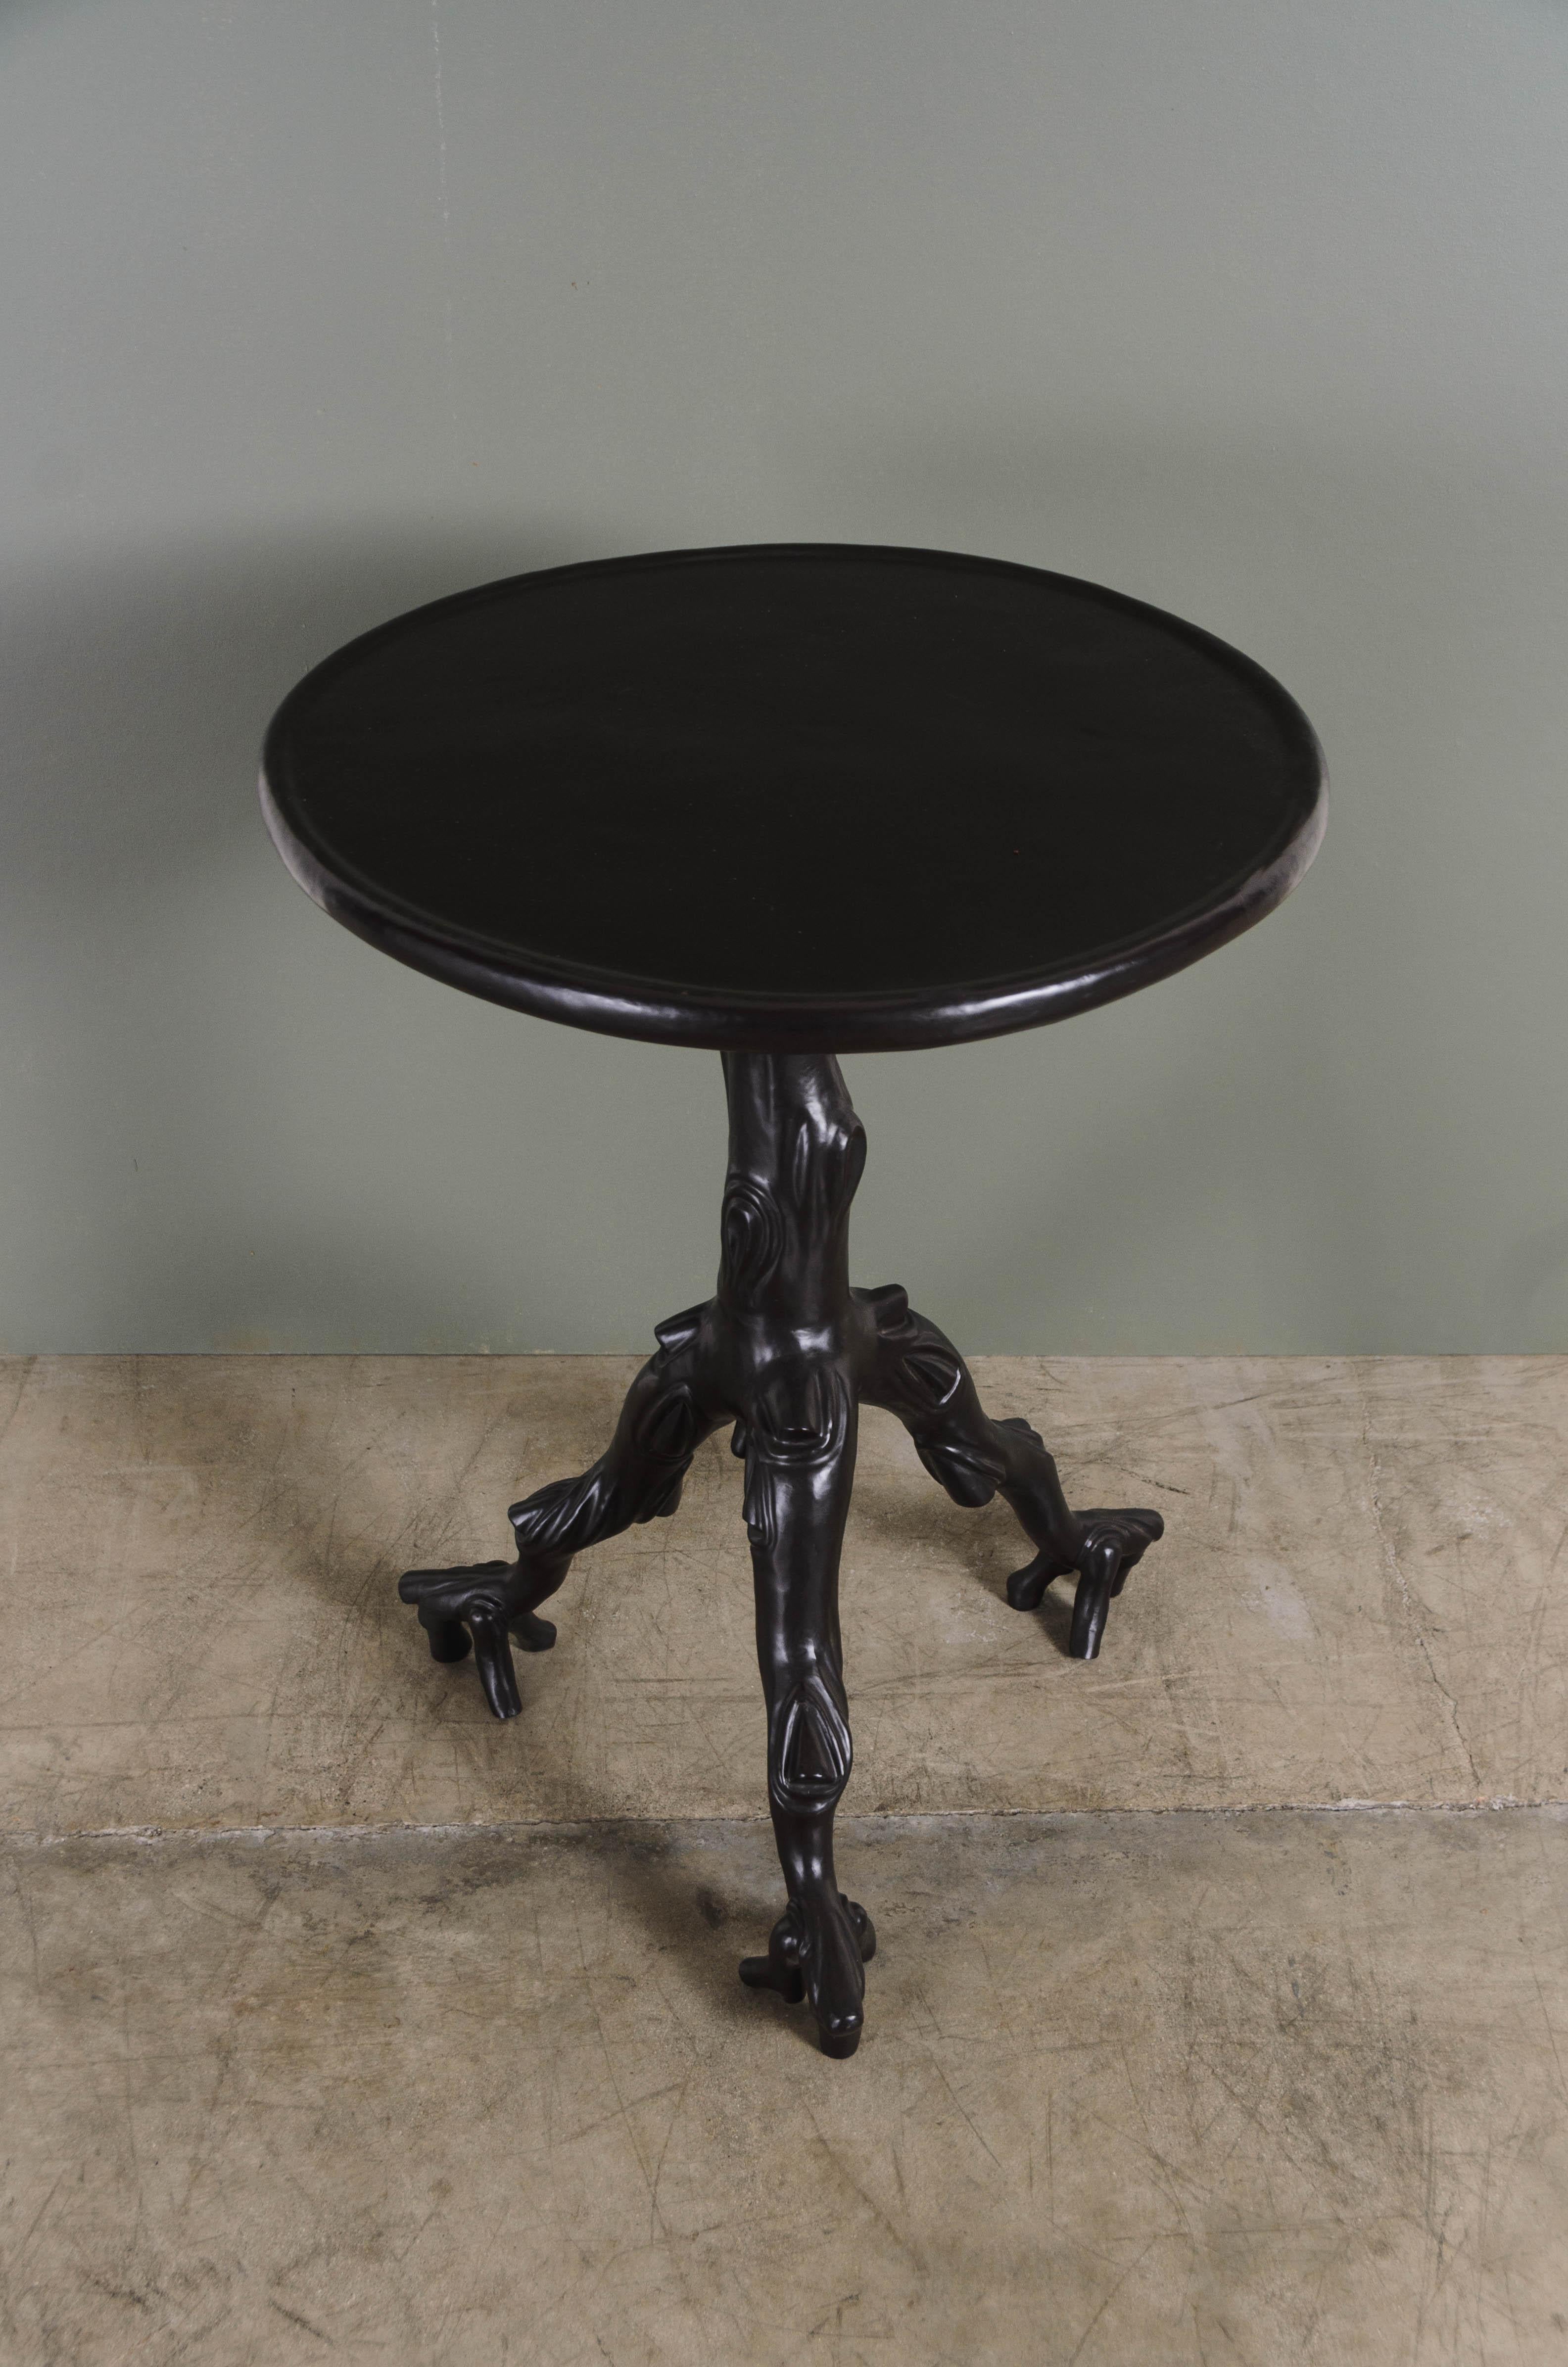 Modern Contemporary Repoussé Copper Twig Table by Robert Kuo, Limited Edition For Sale